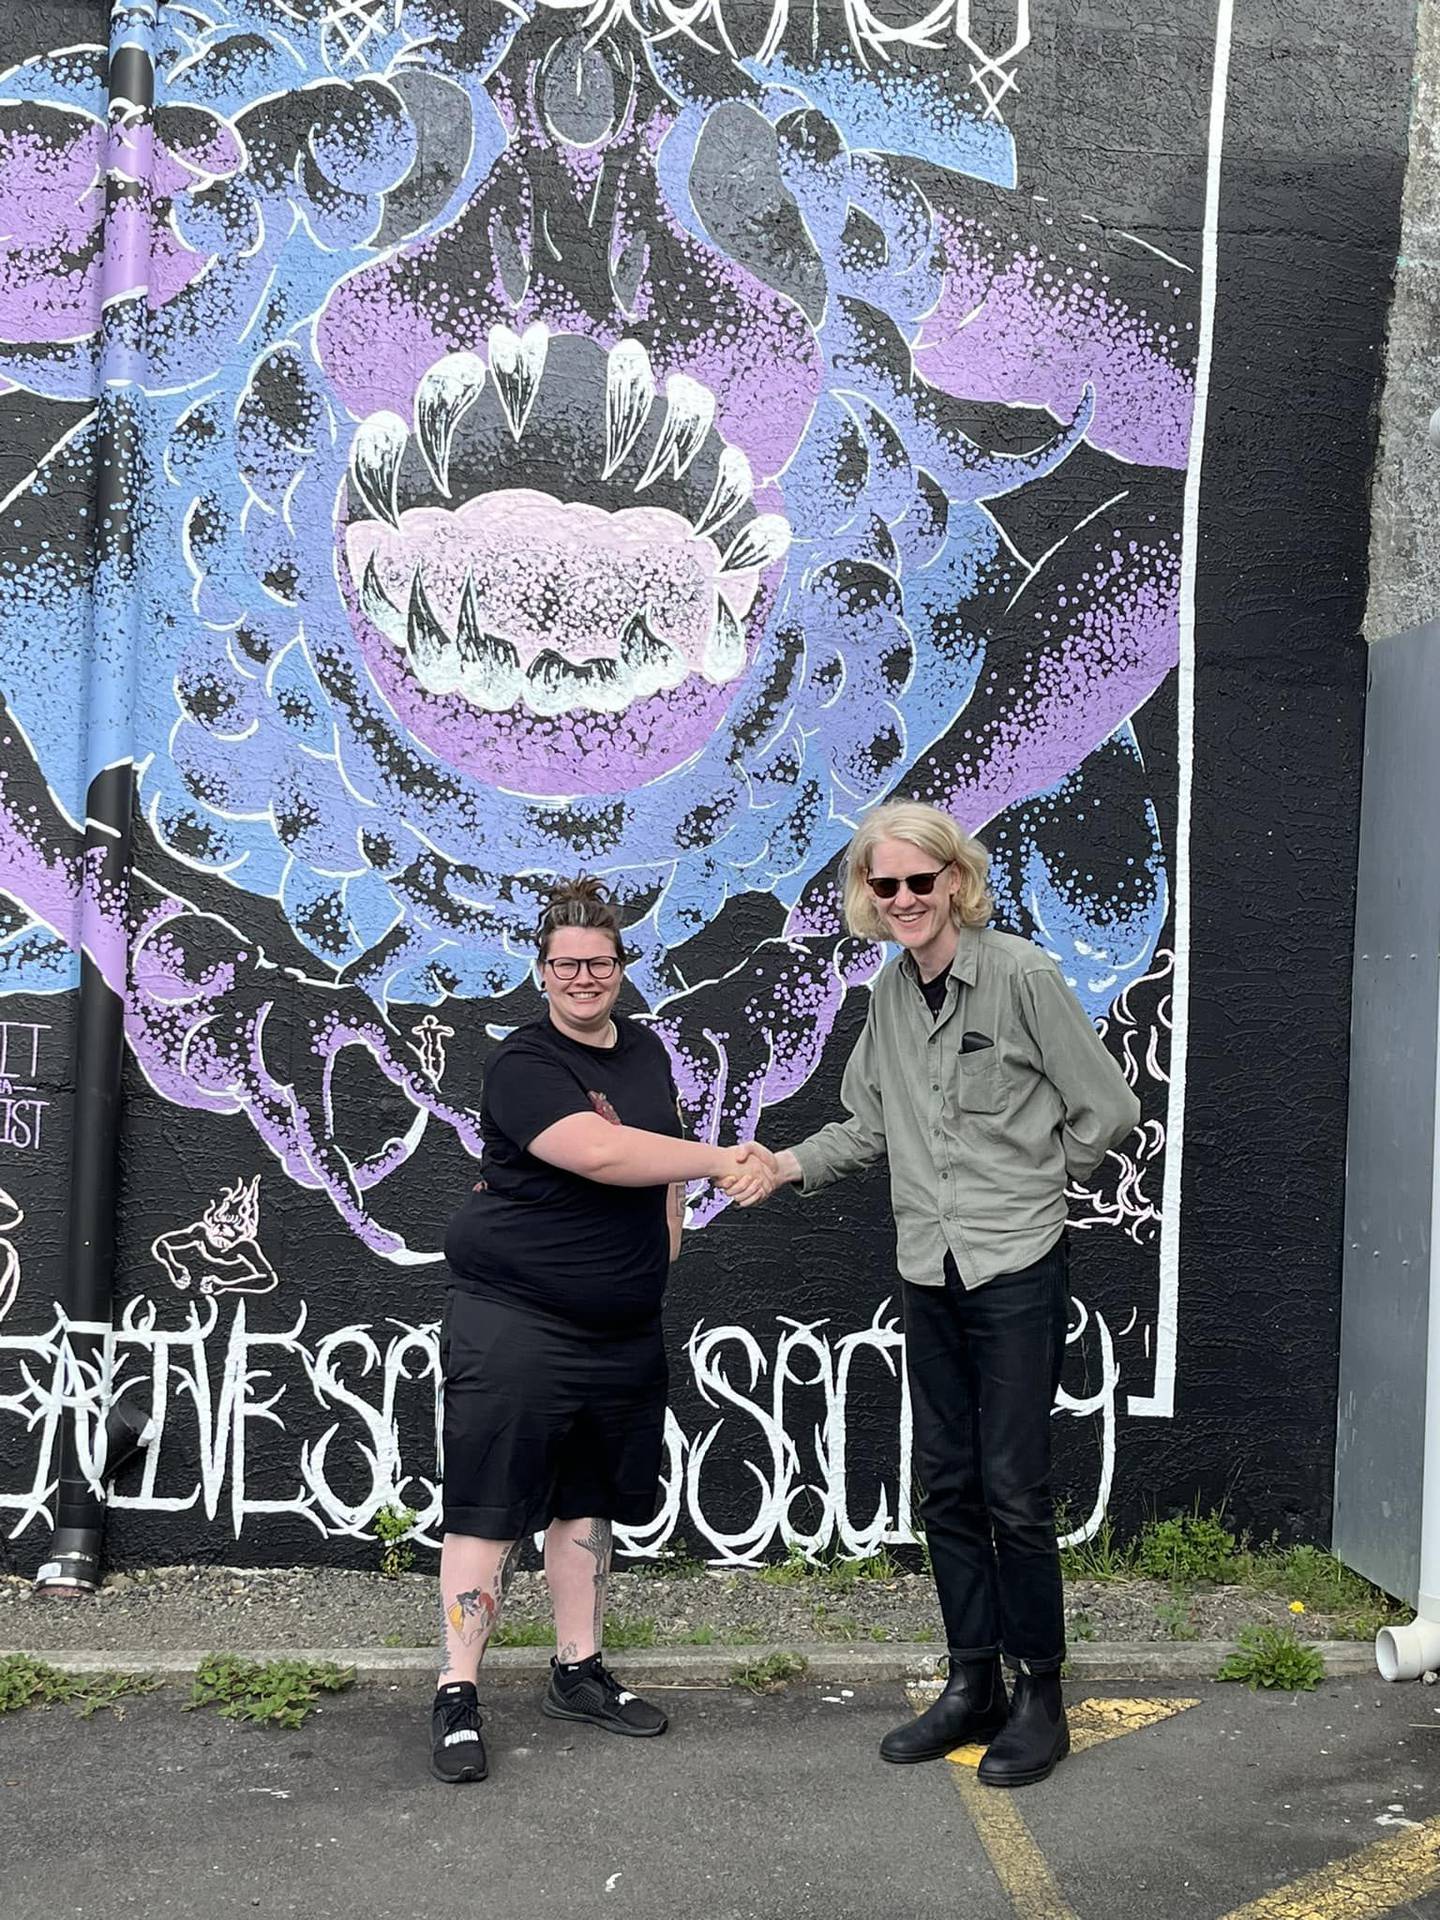 The Stomach community outreach coordinator Abi Symes shakes hands with manager Harry Lilley. Symes will take over from Lilley at the end of April. Photo / Supplied